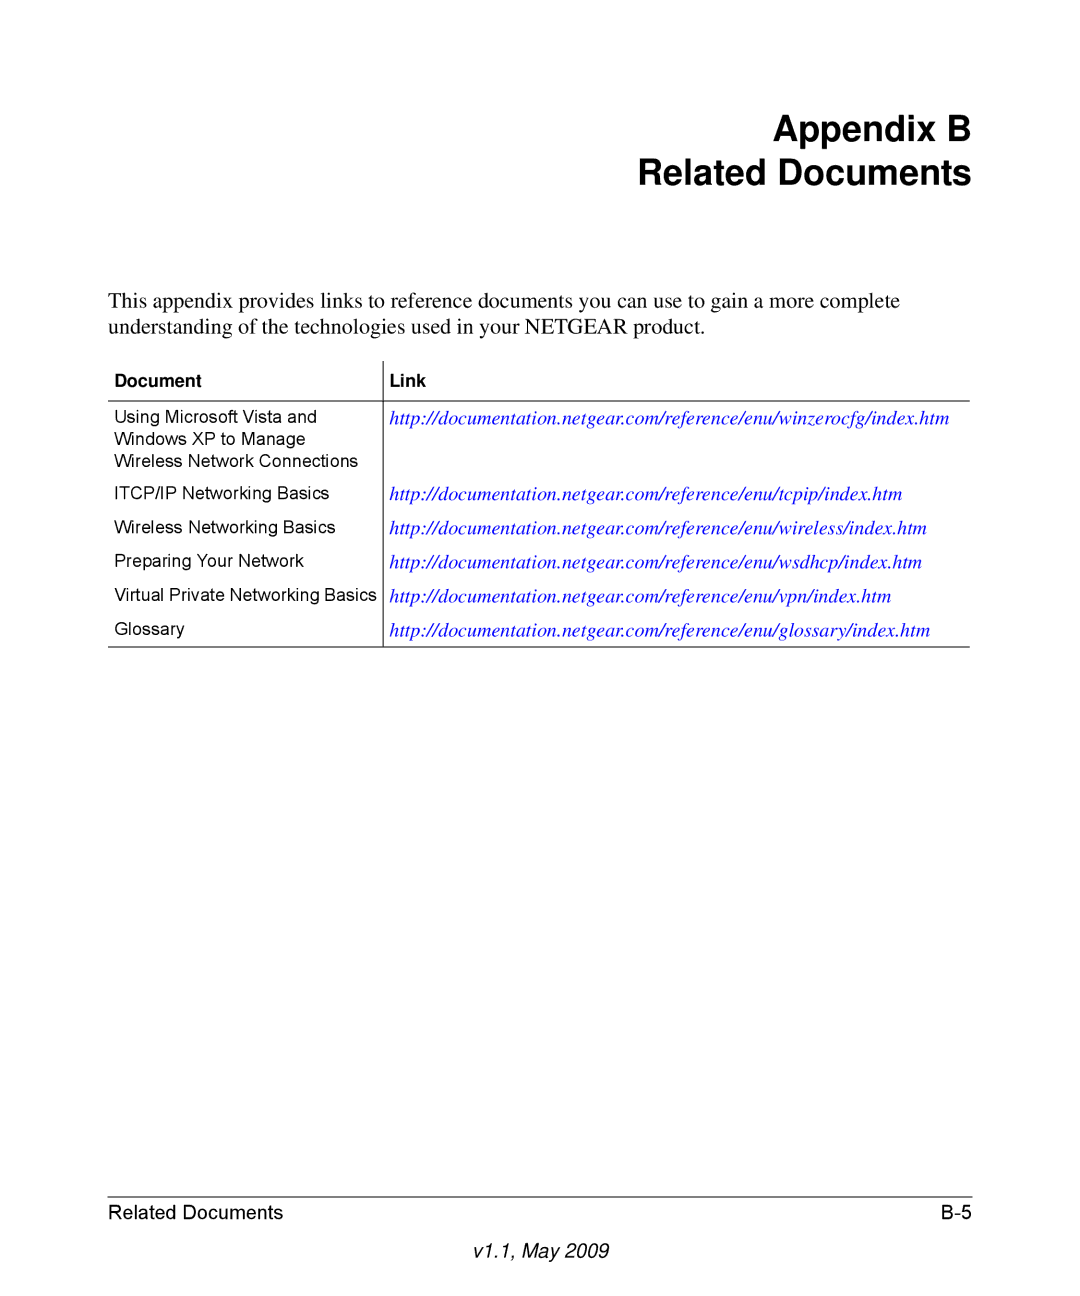 Gateway CGD24G user manual Appendix B Related Documents, Document Link 